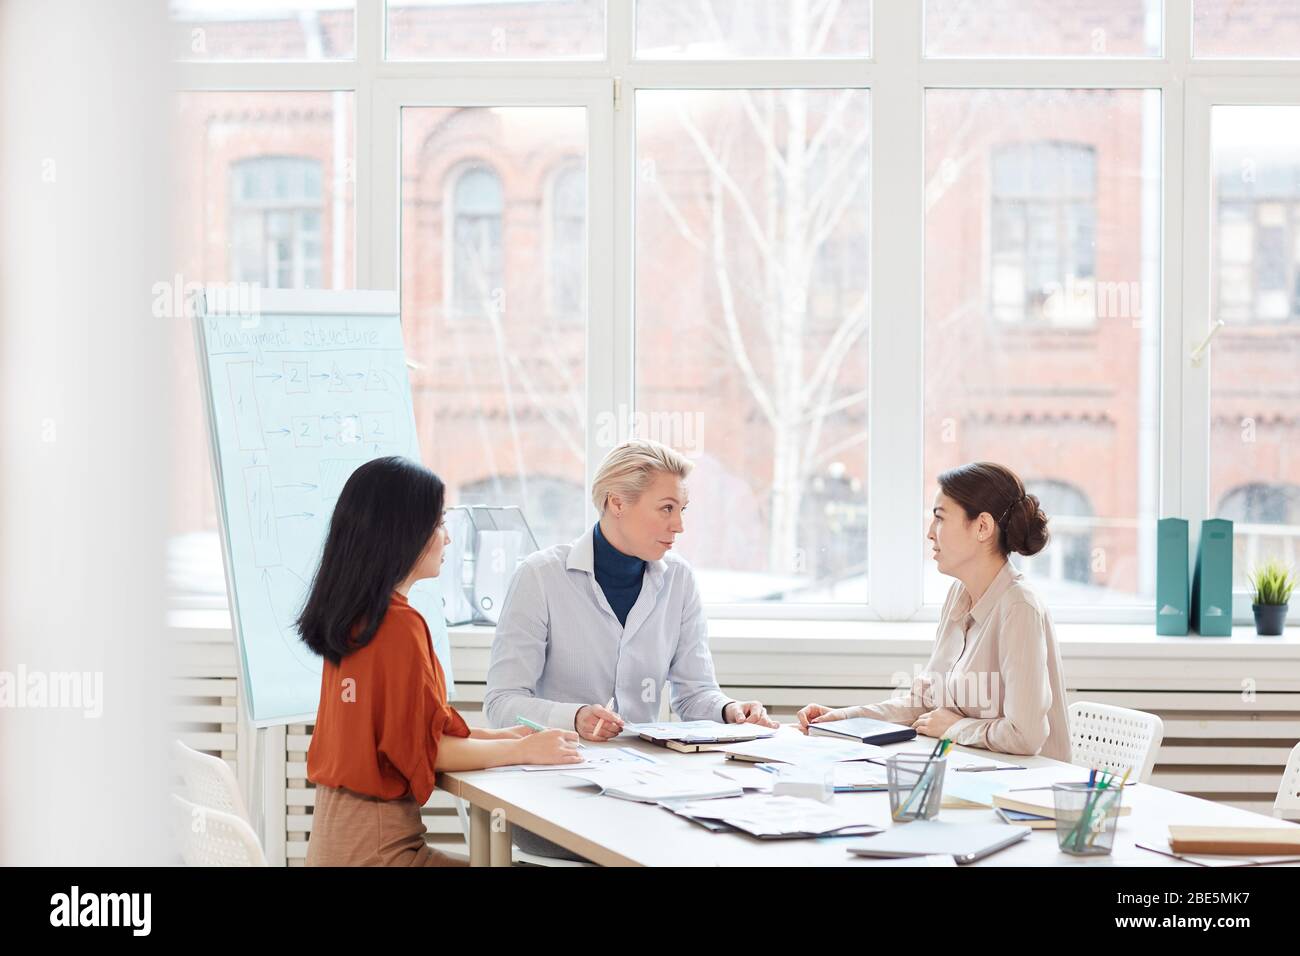 Group of modern businesswomen discussing project while sitting at table against window during meeting in conference room, copy space Stock Photo